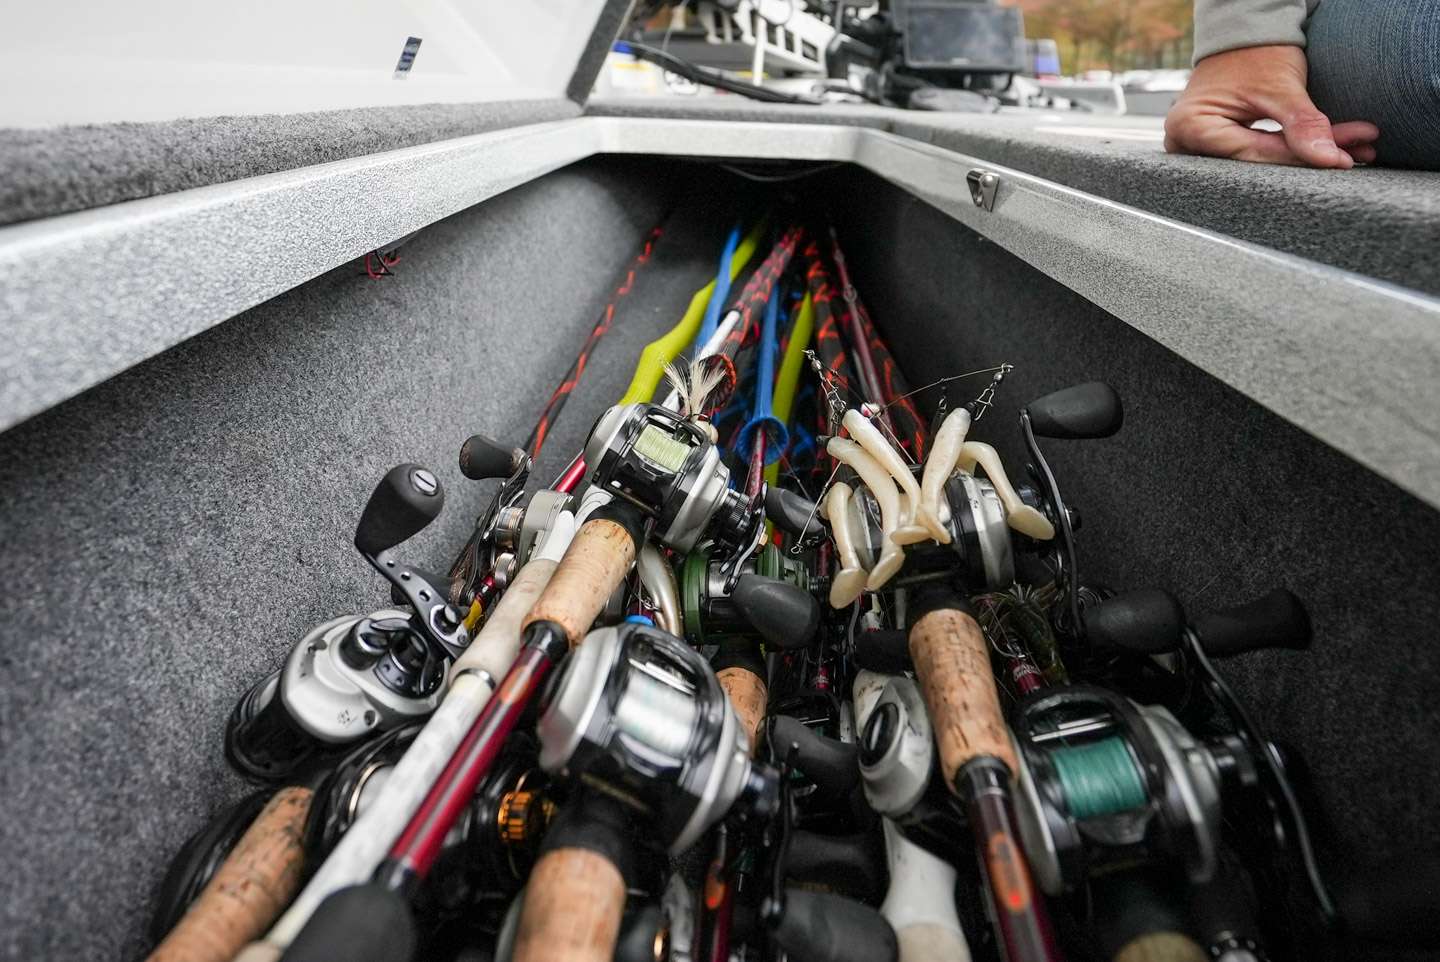 Palmer takes his rod organizer out of the rod locker, which allows him to carry more rods. He keeps roughly 20 to 25 rods in the boat. 